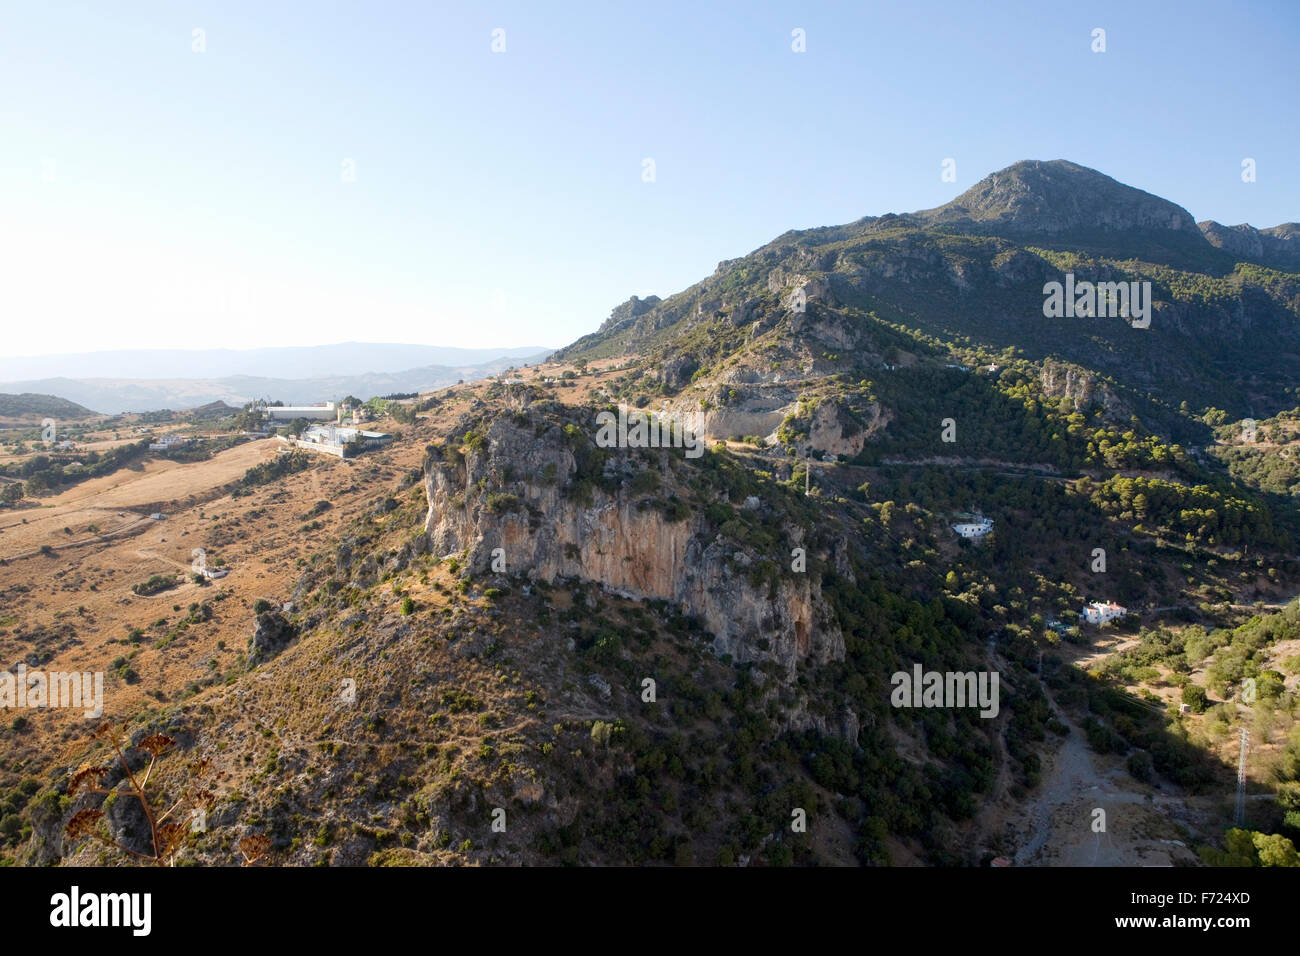 The mountains of Andalucia near Casares, Spain. Stock Photo